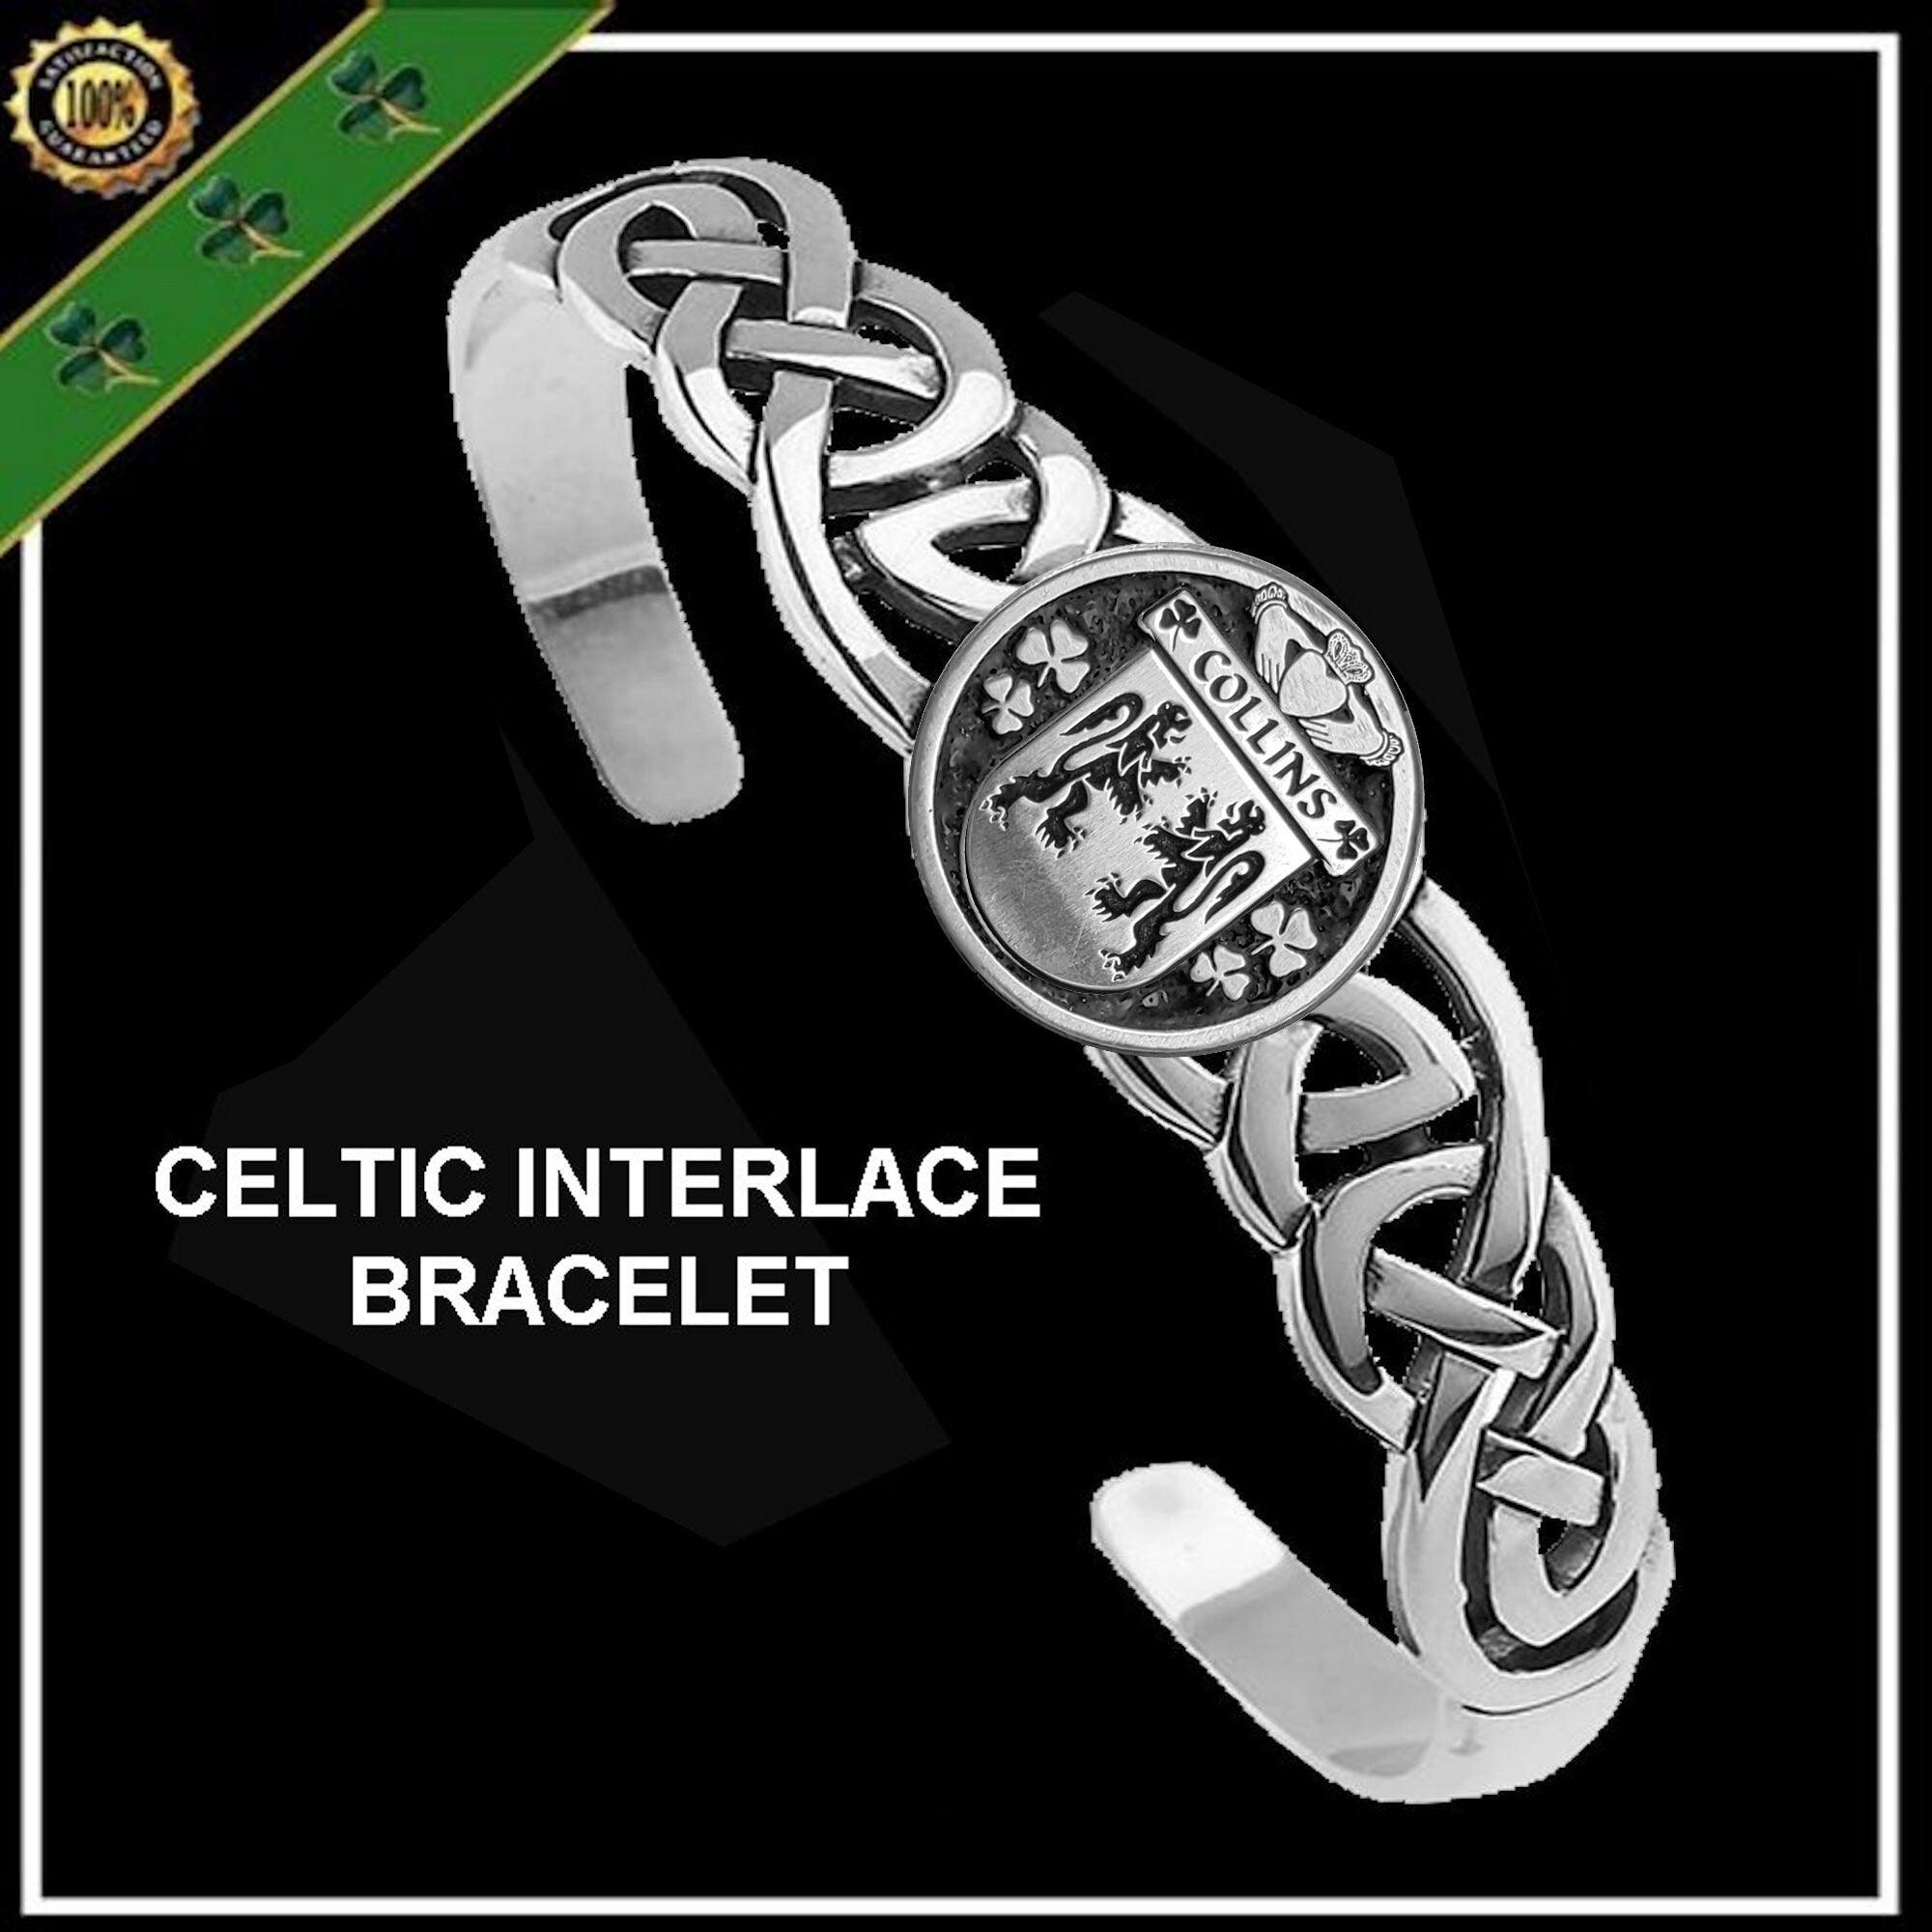 Collins Irish Coat of Arms Disk Cuff Bracelet - Sterling Silver